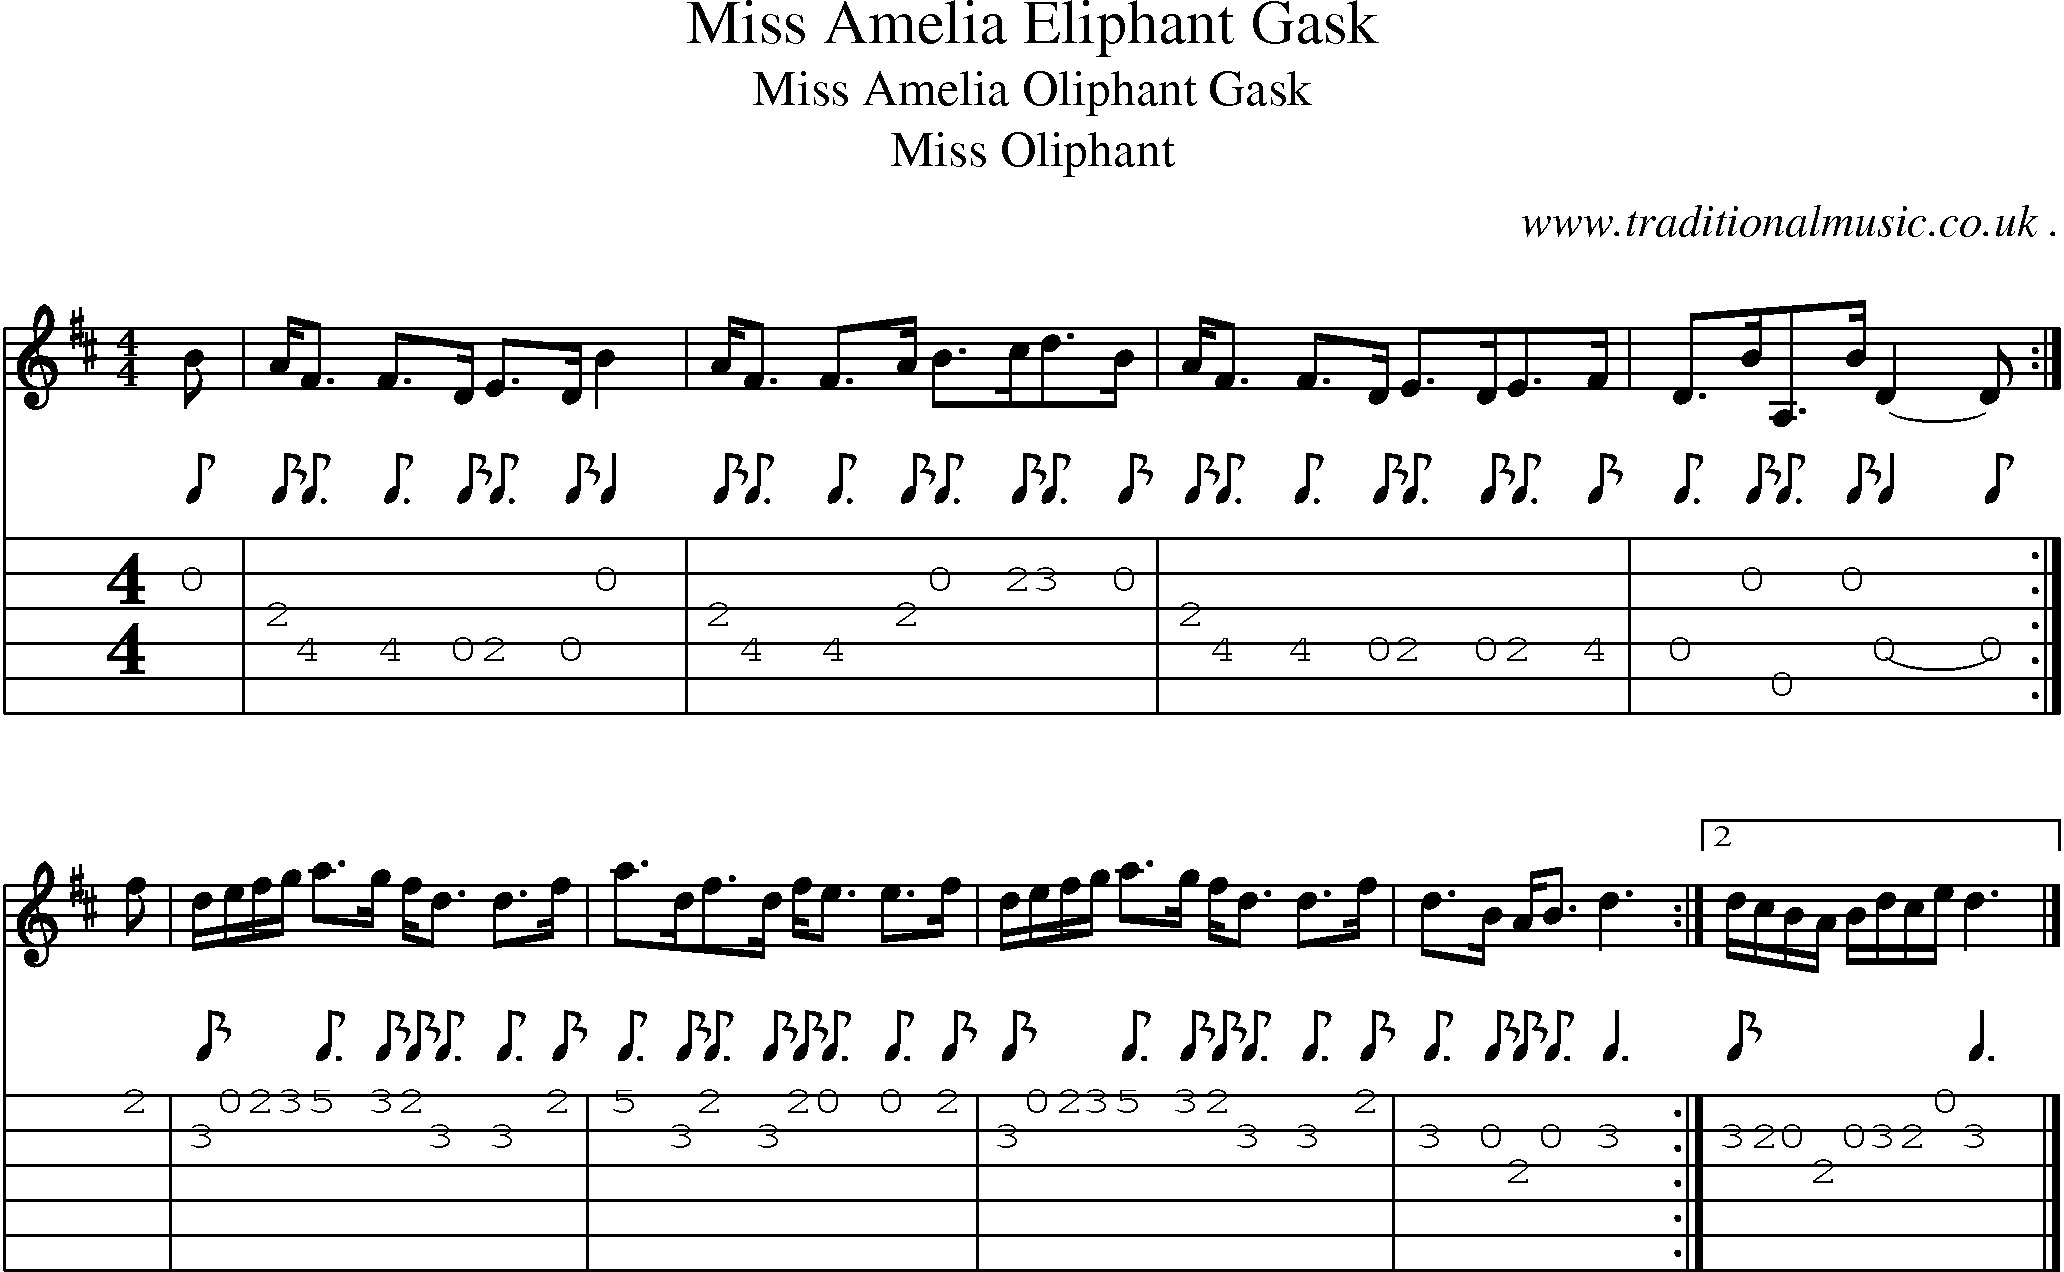 Sheet-music  score, Chords and Guitar Tabs for Miss Amelia Eliphant Gask